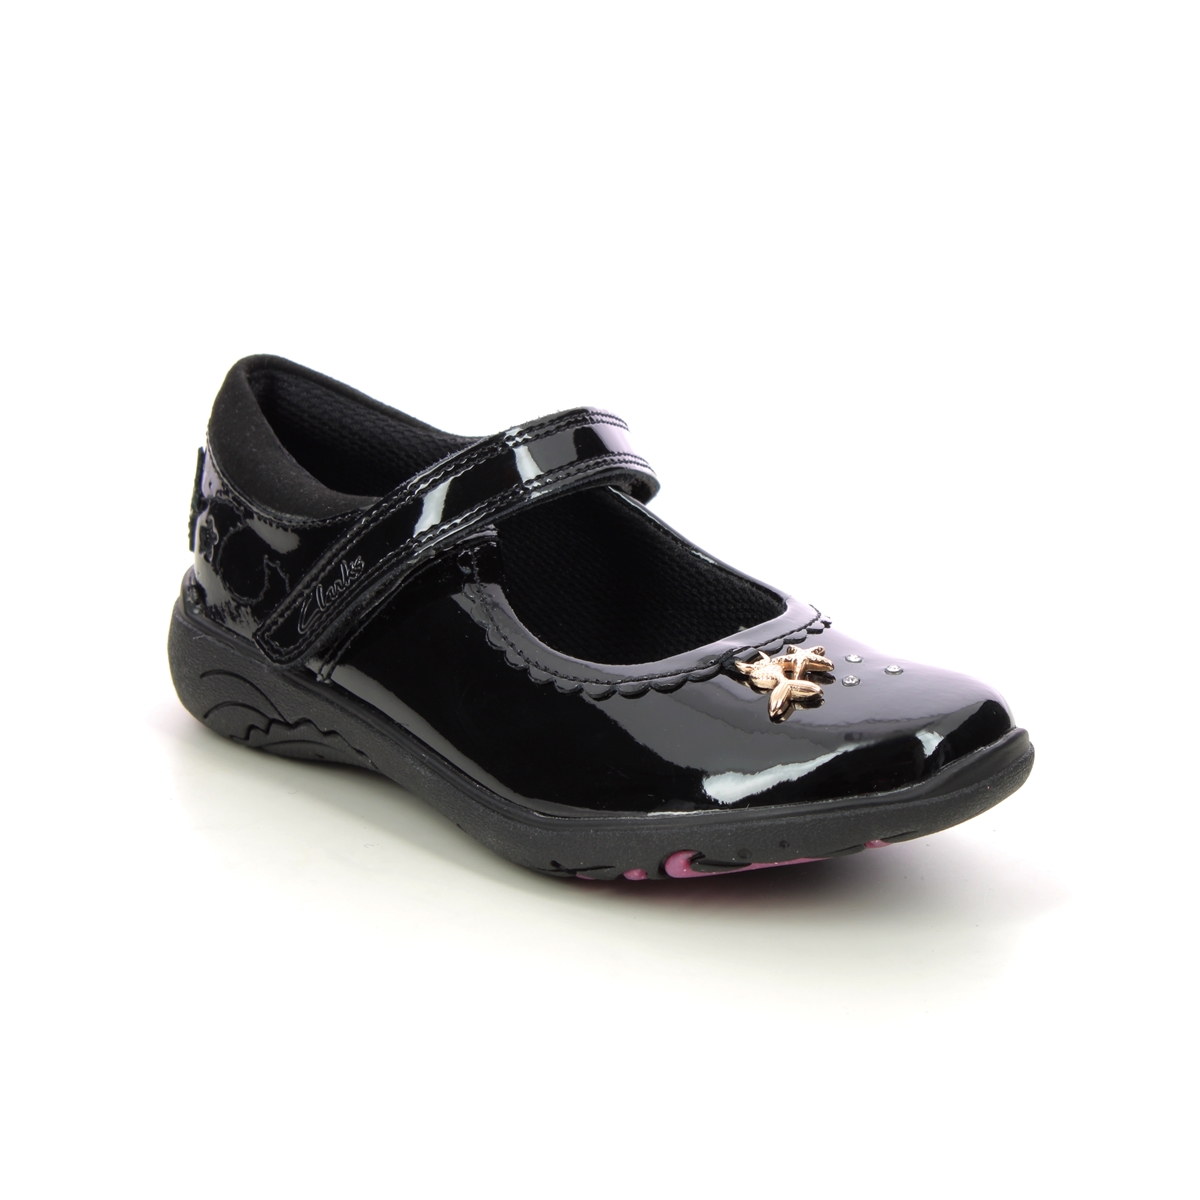 Clarks Relda Sea K Mary Jane Black Patent Kids Girls School Shoes 722415E In Size 11.5 In Plain Black Patent E Width Fitting Narrow Fit For School For